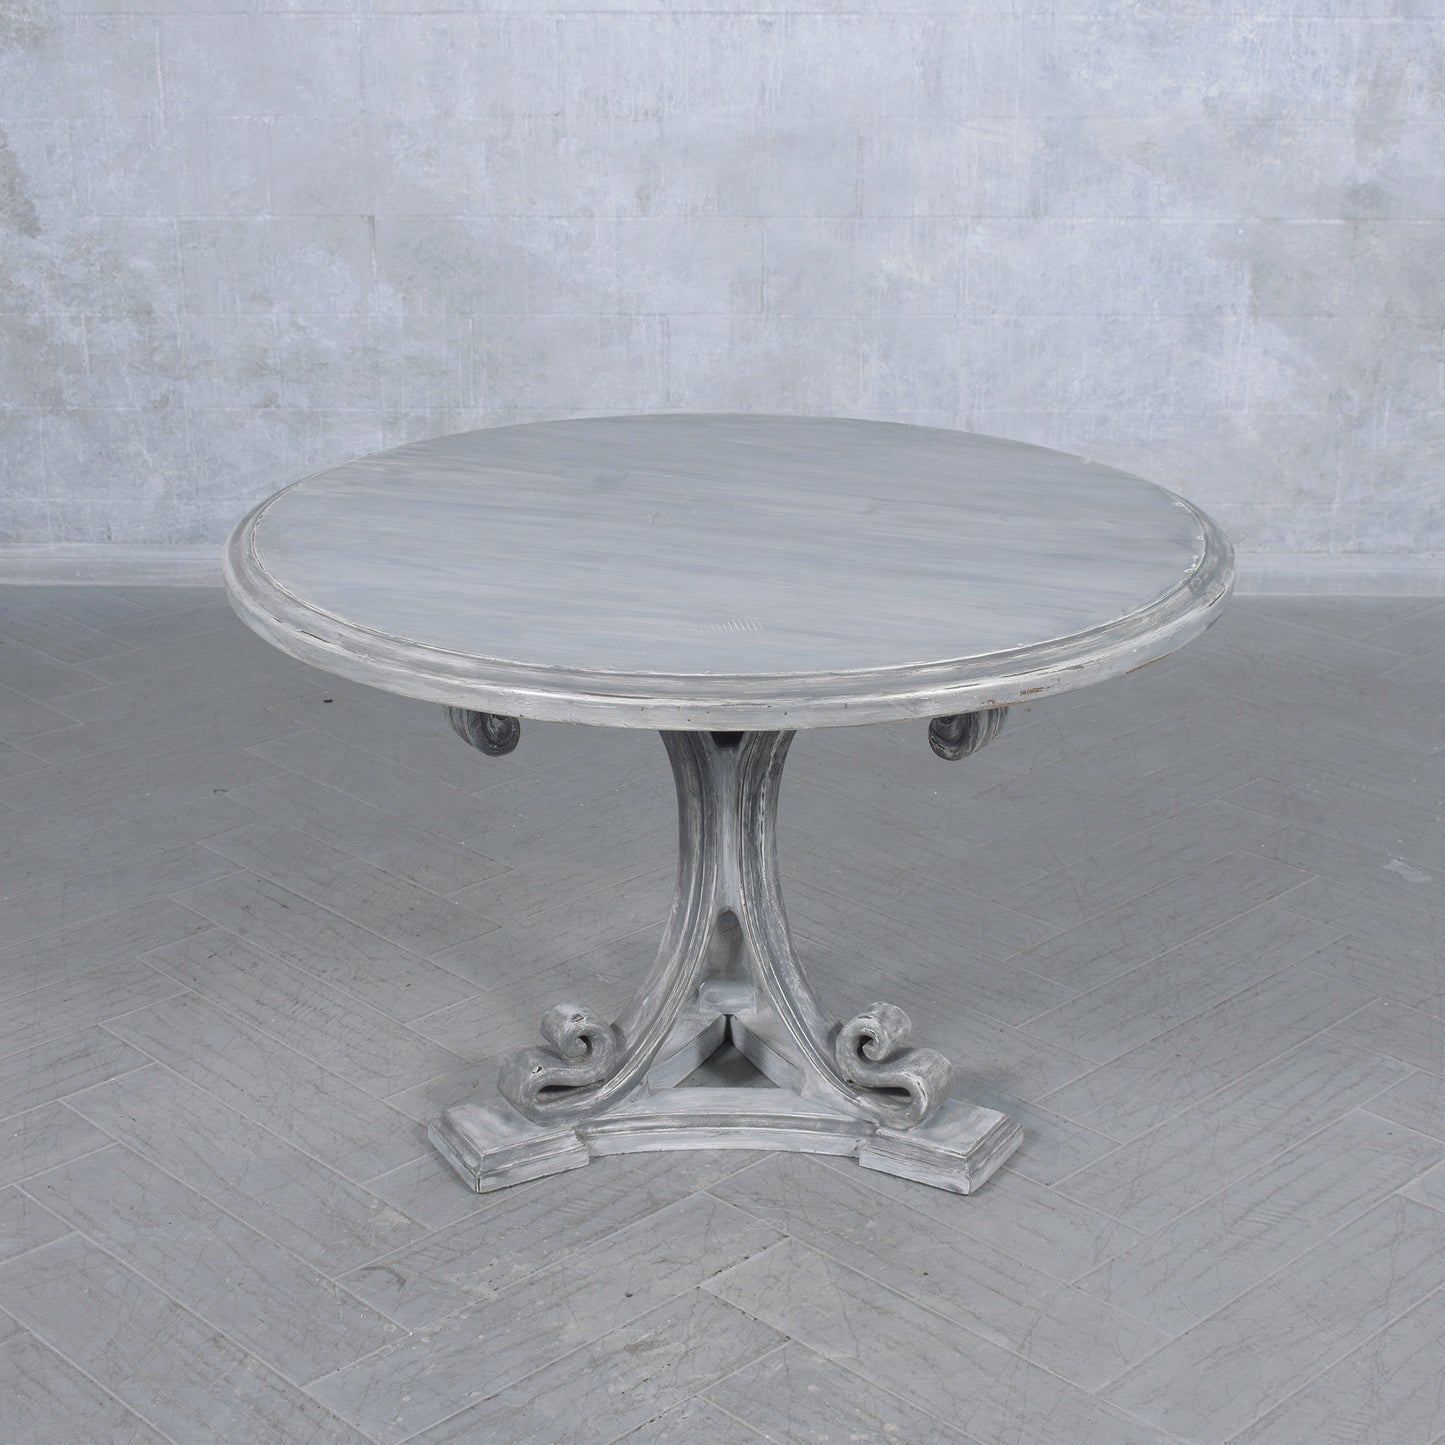 Vintage American Regency Walnut Round Dining Table with Distressed Grey Finish